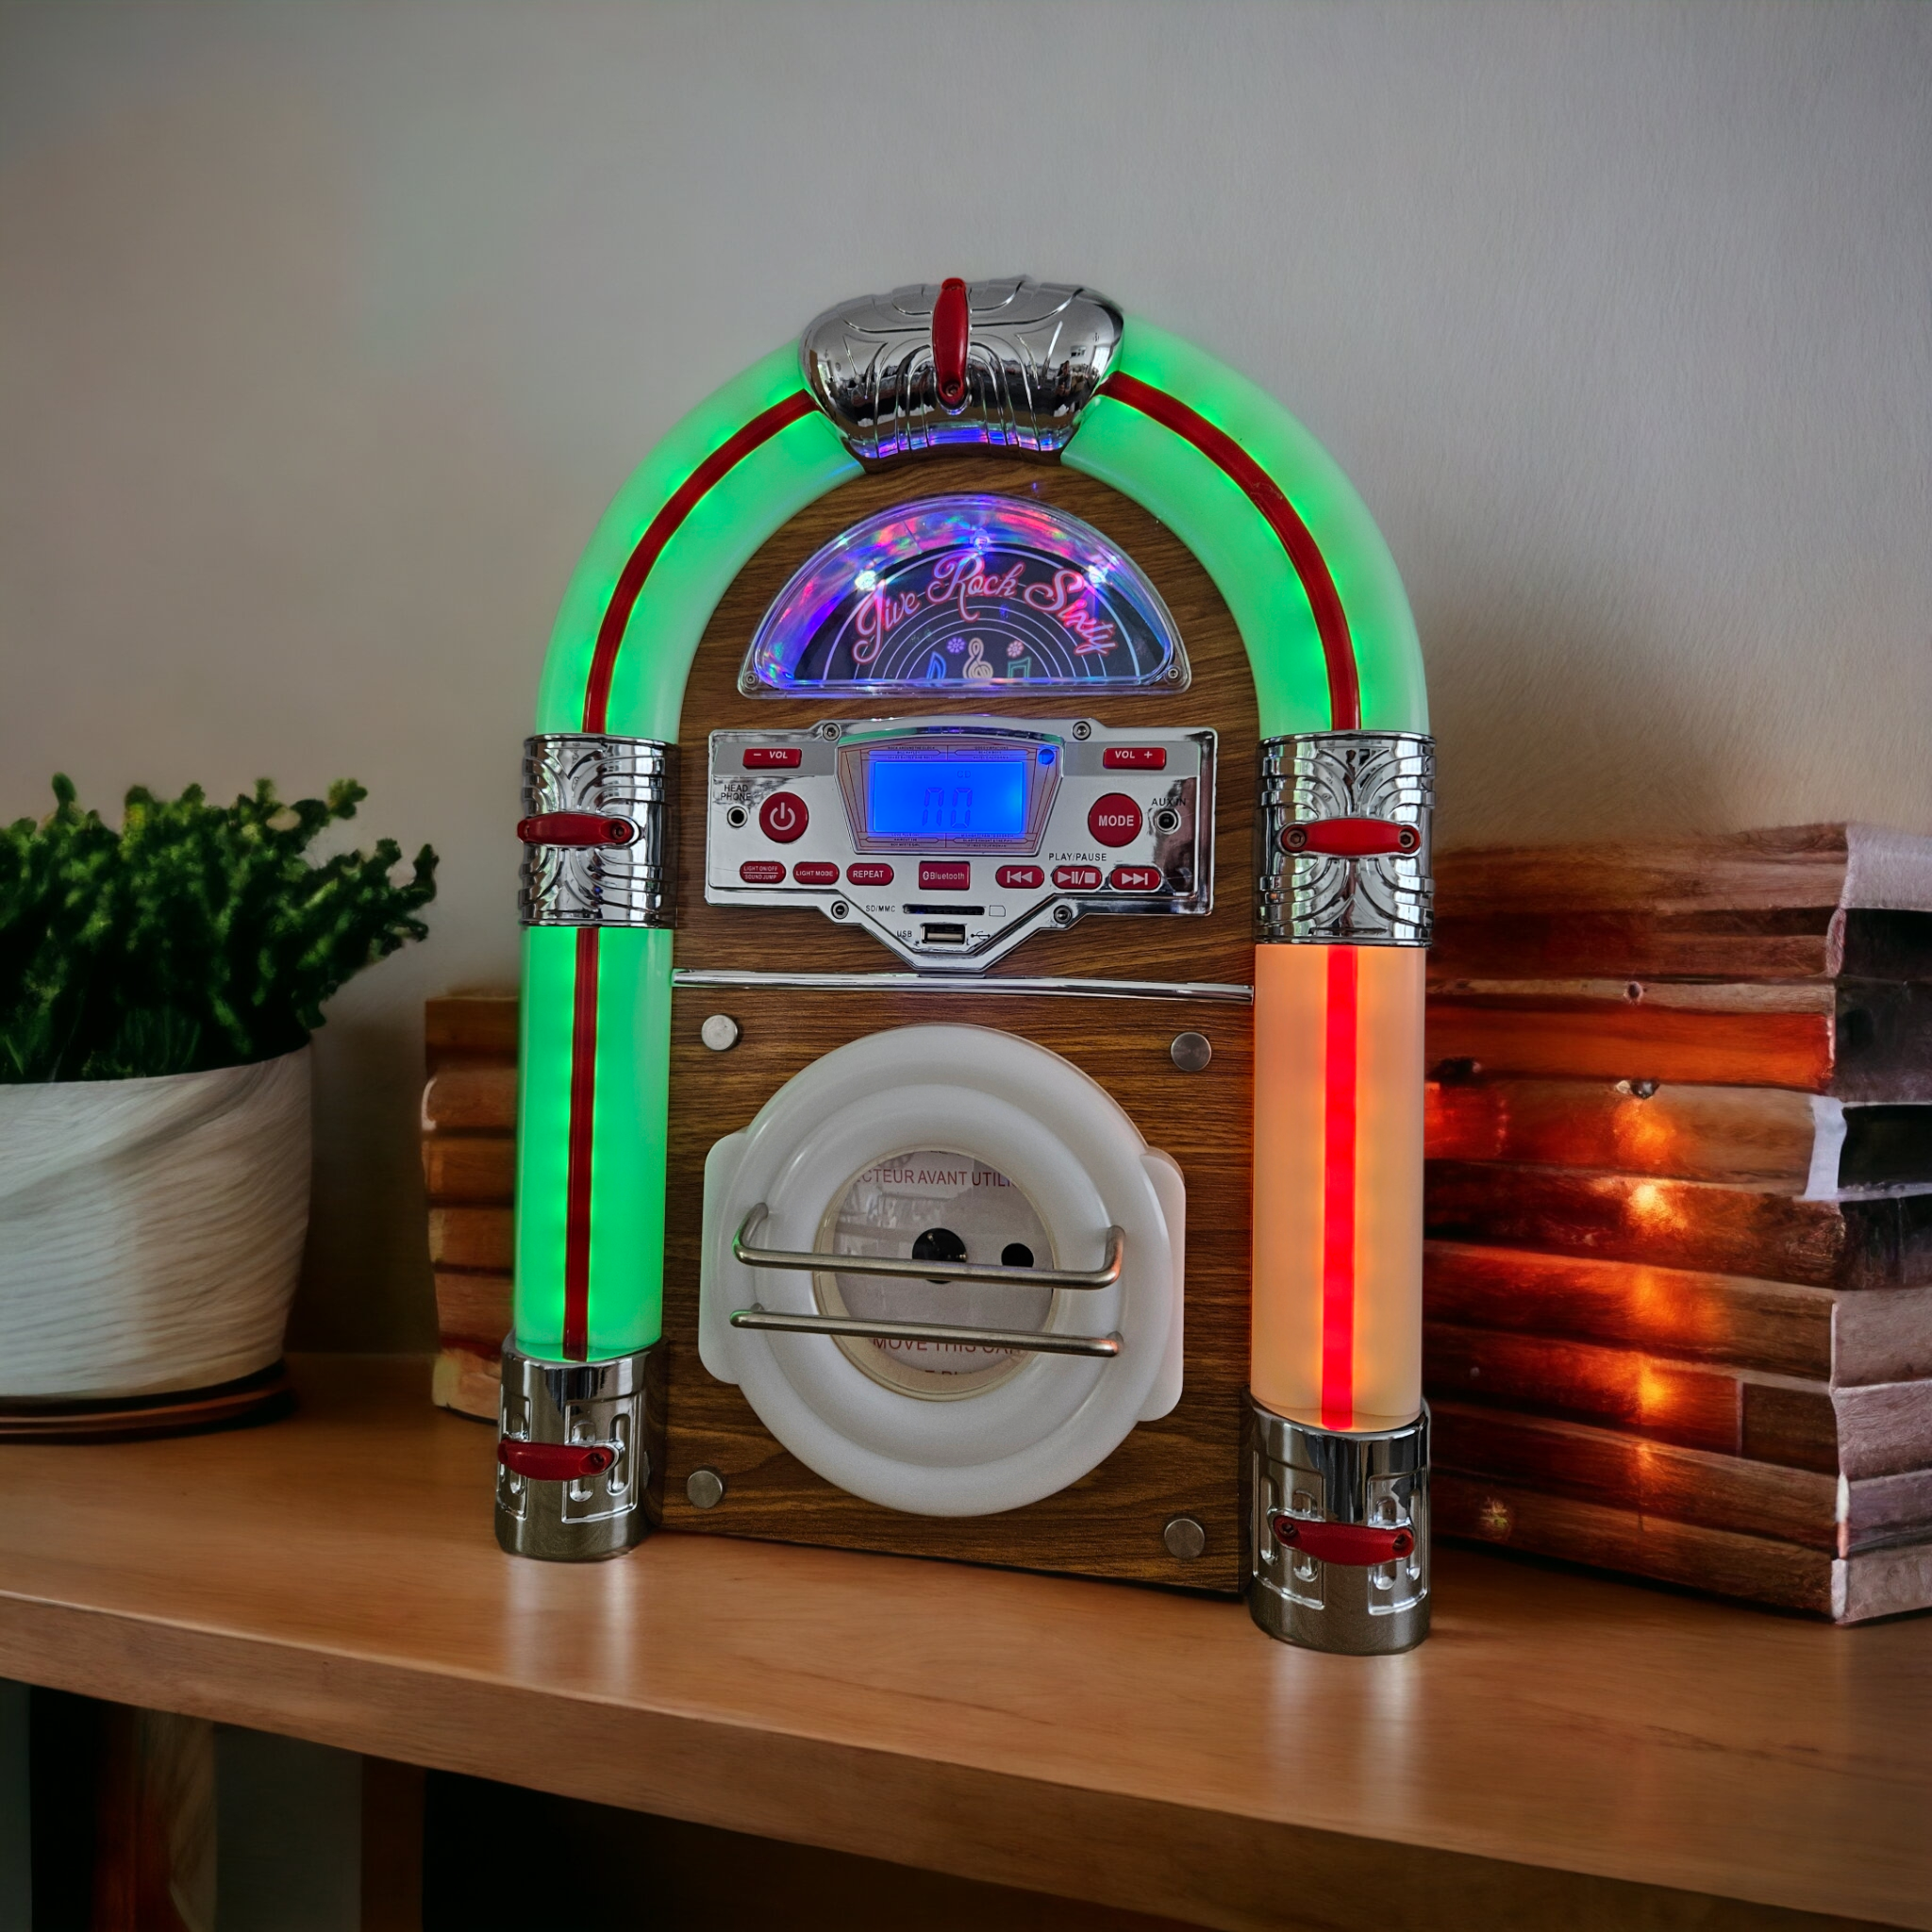 JIVE ROCK 60s Sixtys Retro Table Top Jukebox - CD, Radio, Bluetooth, MP3 - Luces LED que cambian de color